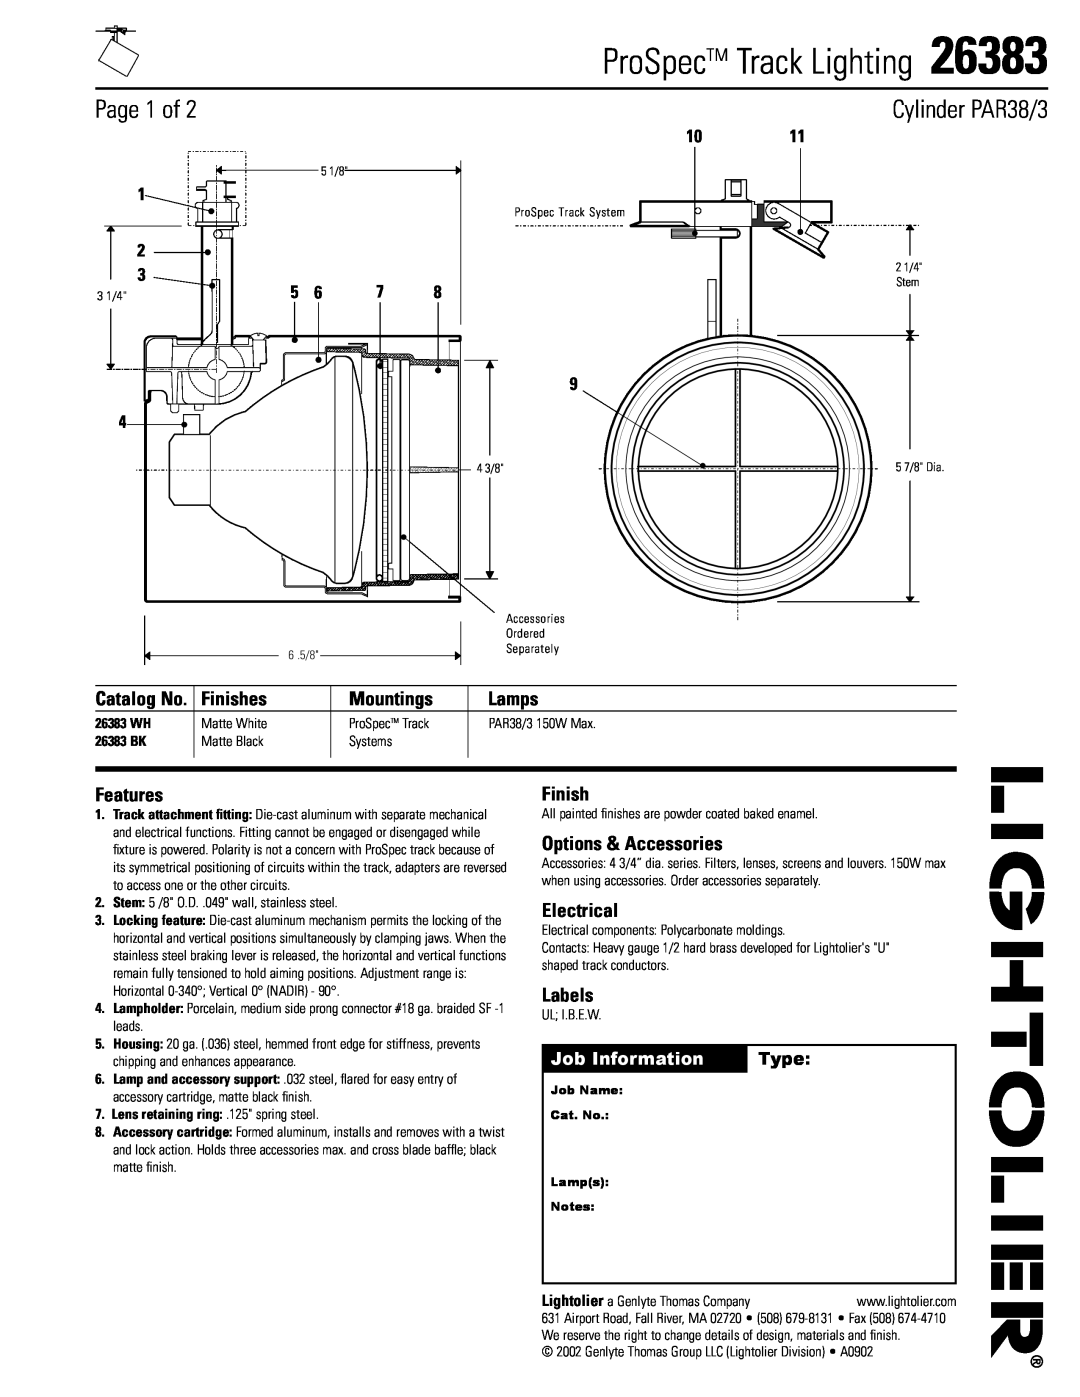 Lightolier 26383 manual ProSpecTM Track Lighting, Page 1 of, Cylinder PAR38/3, Finishes, Mountings, Lamps, Features, Type 